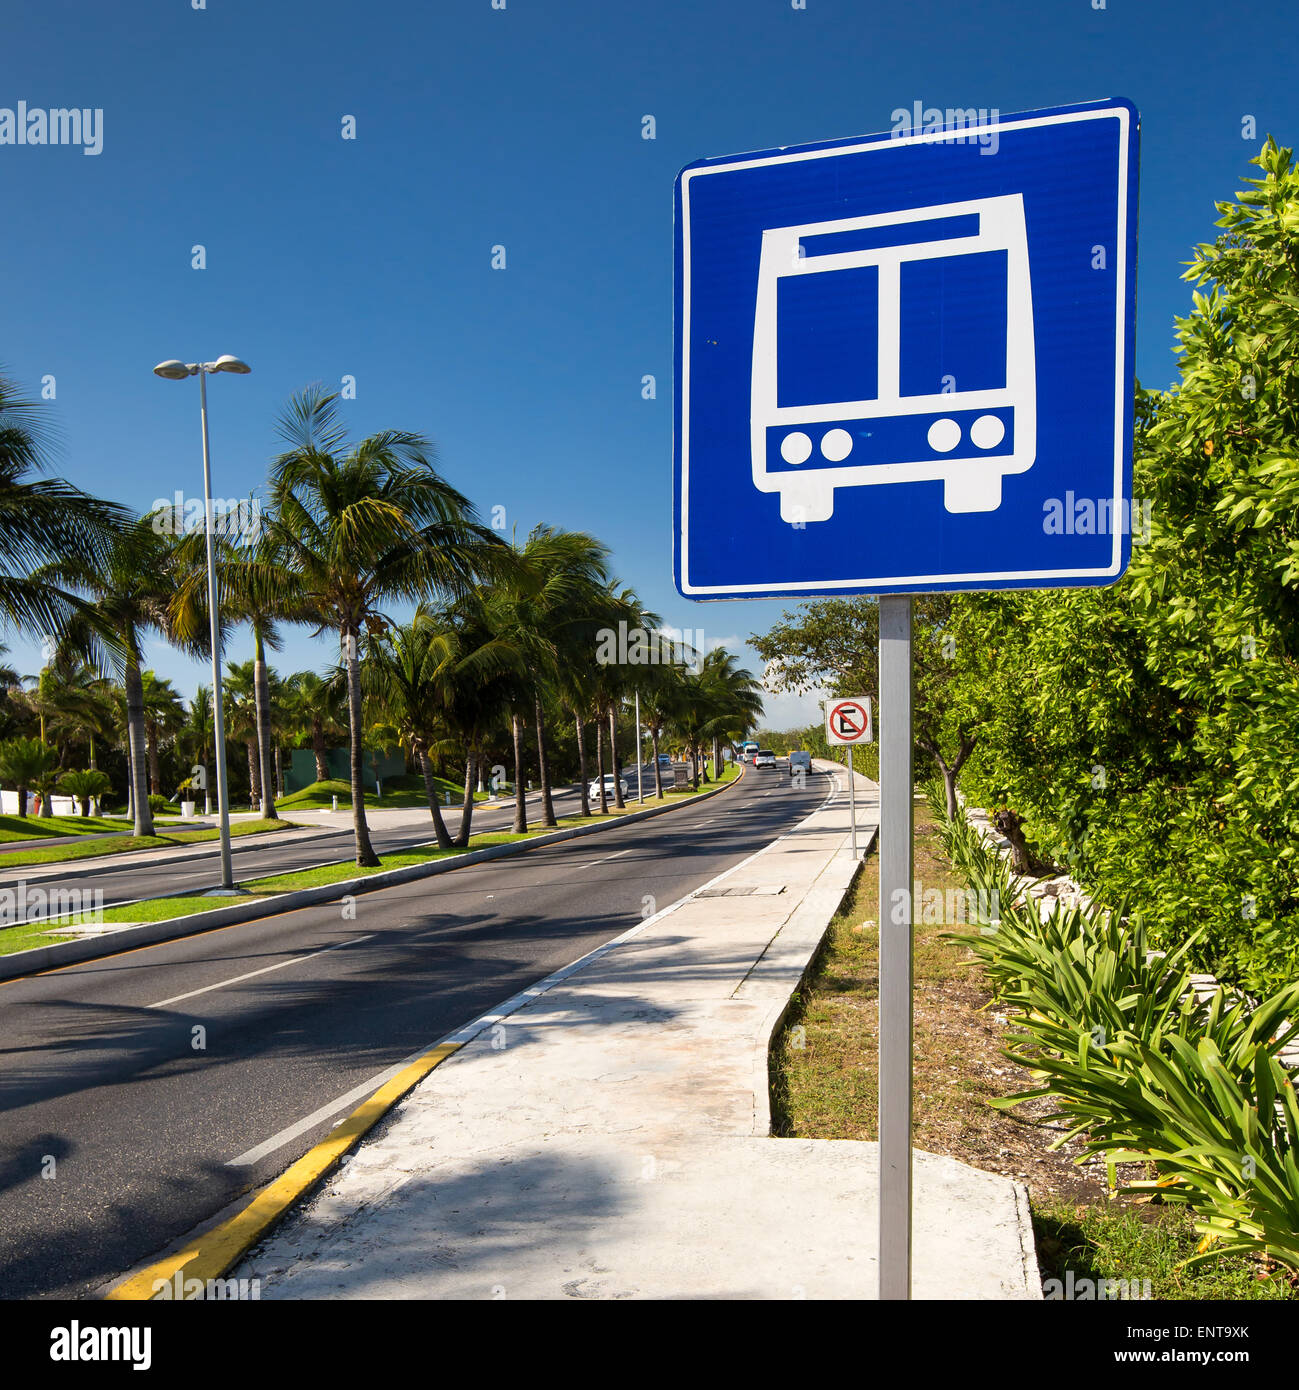 American road public bus stop sign on caribbean street road Stock Photo